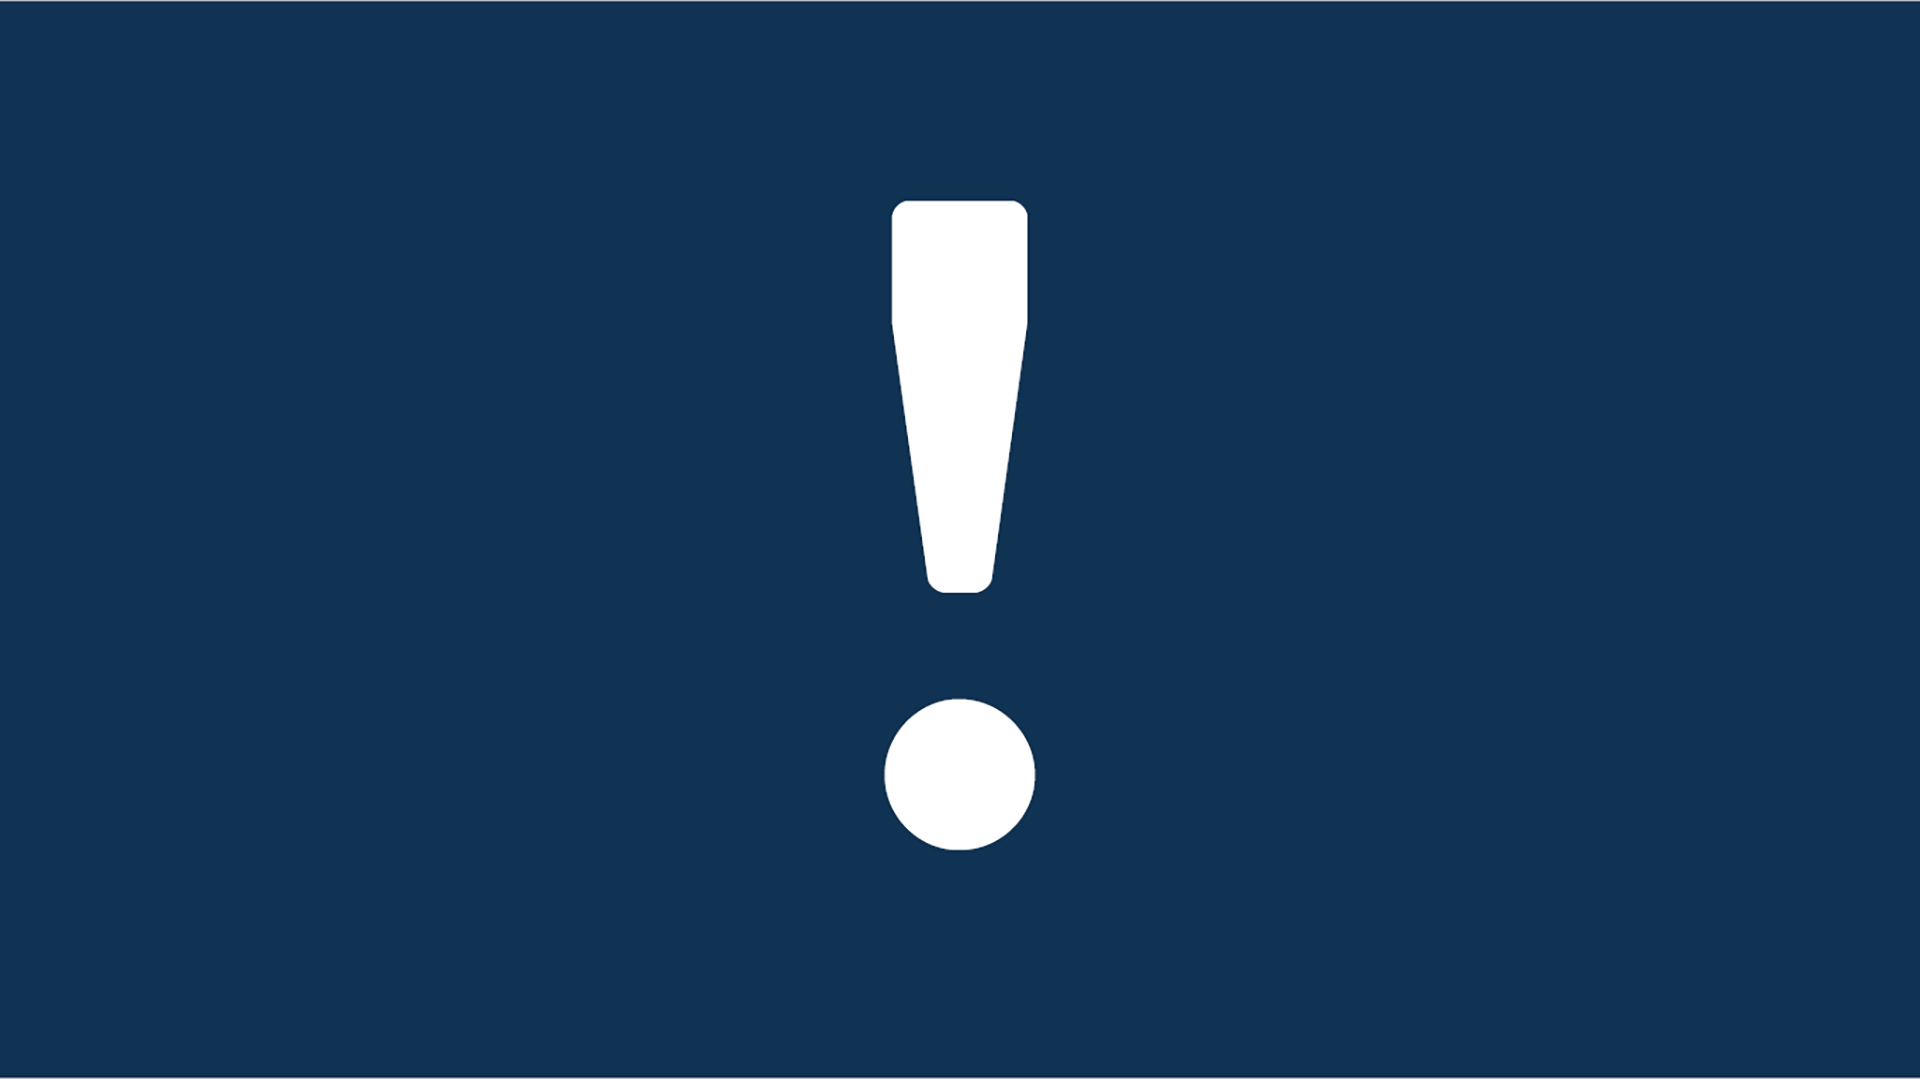 Banner of a white exclamation icon on a navy blue background.